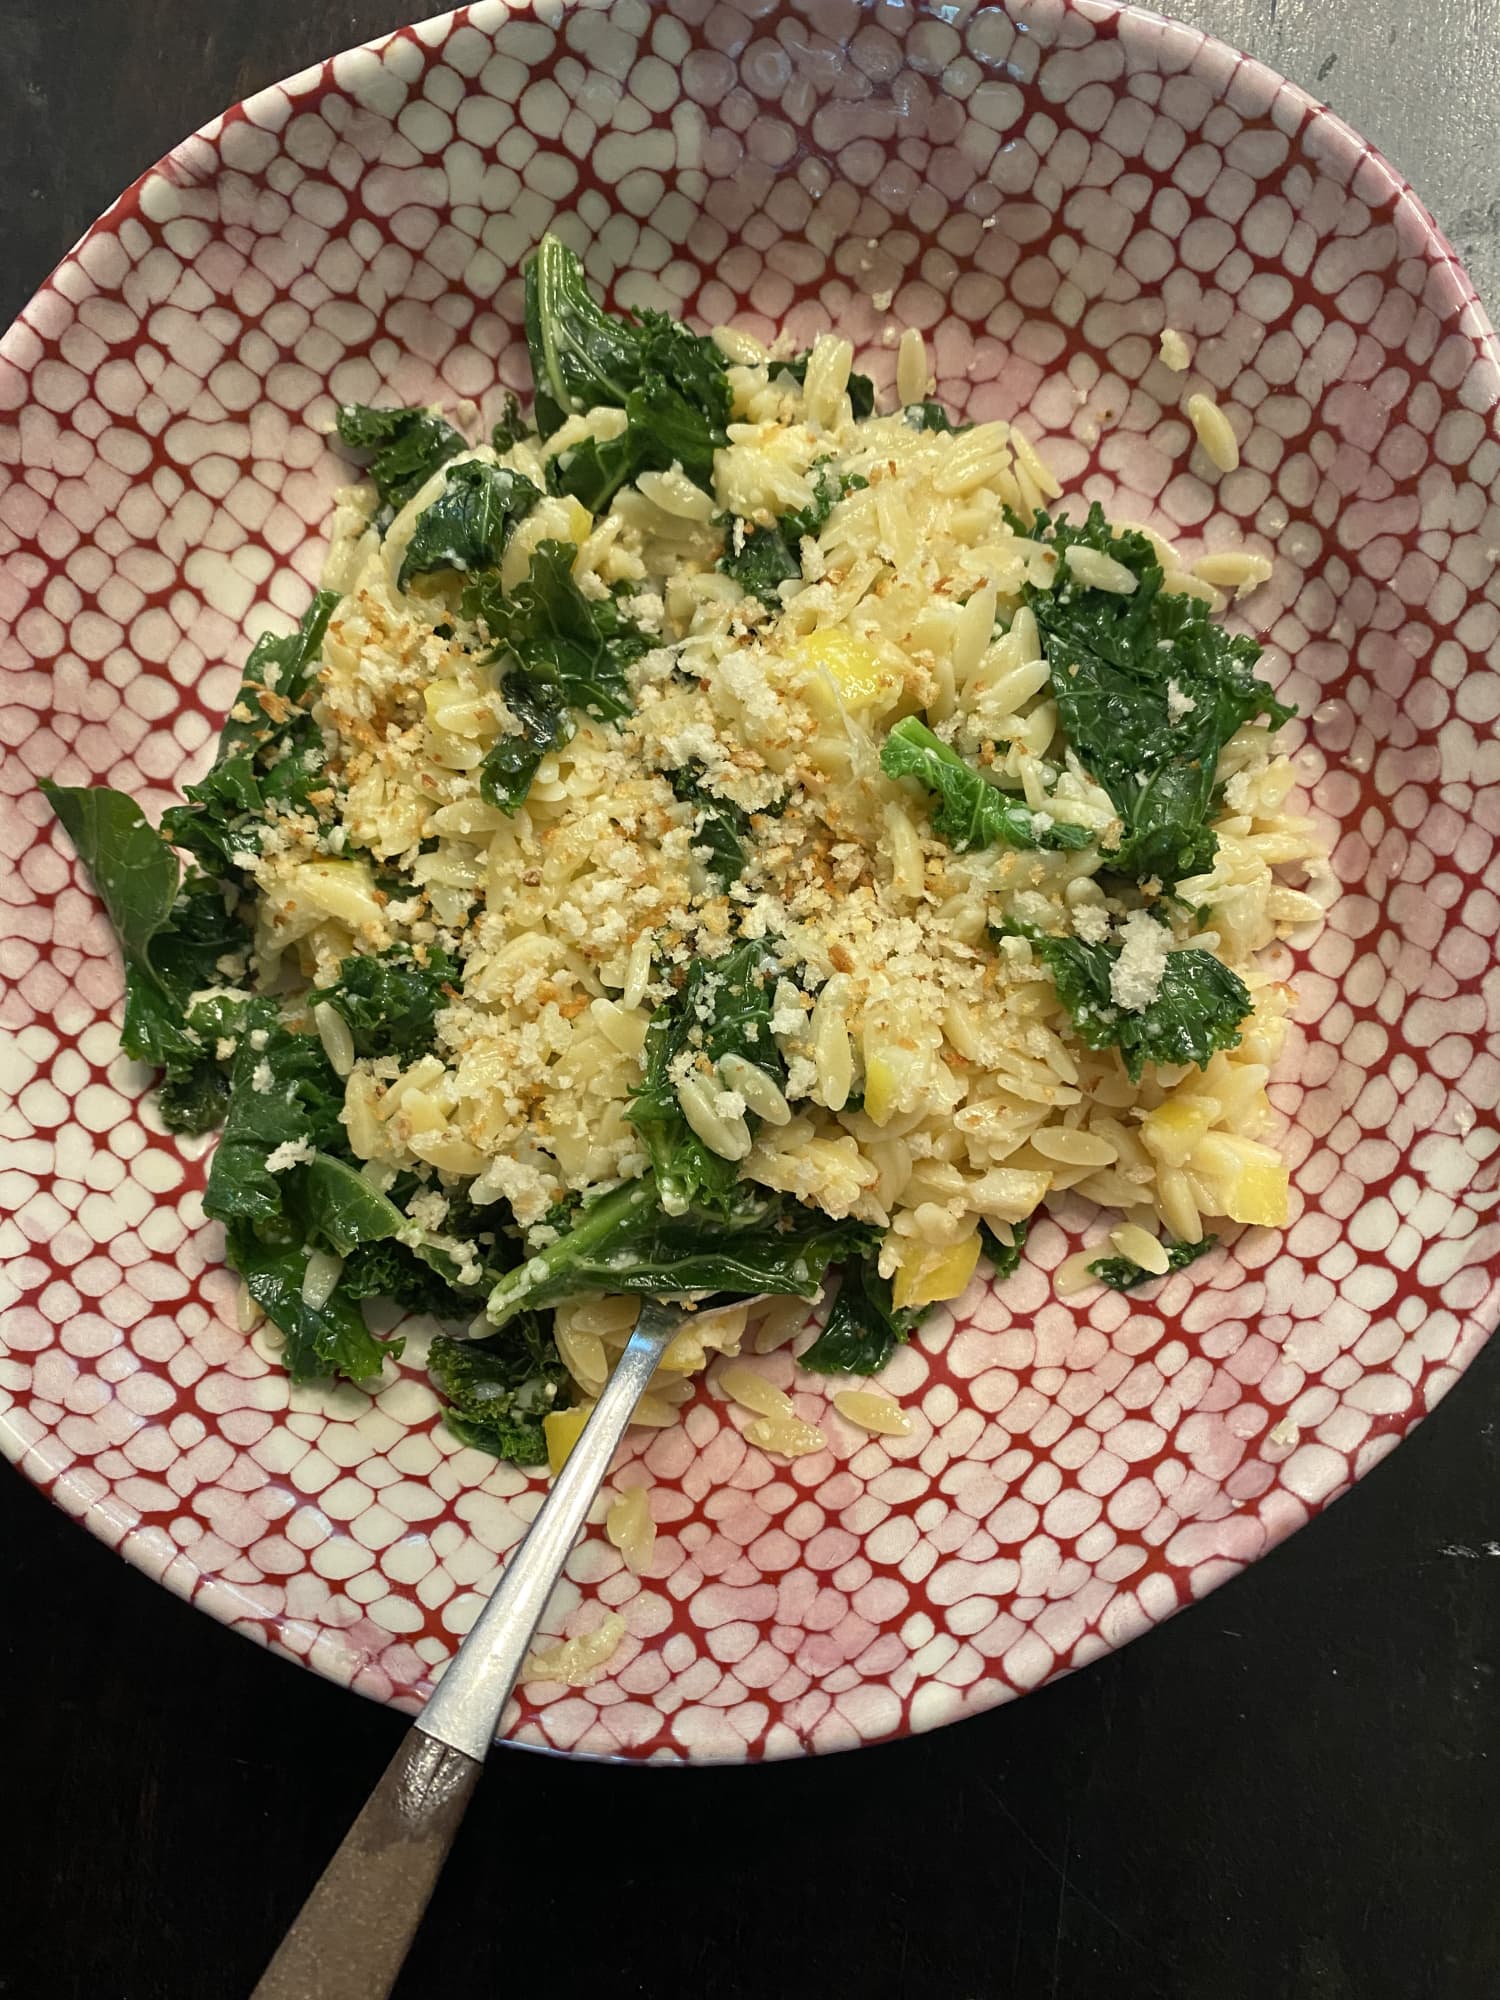 I Tried Caramelized Lemon Butter Orzo with Kale and Garlic Breadcrumbs and It Was the Tastiest Dish I’ve Had in a While